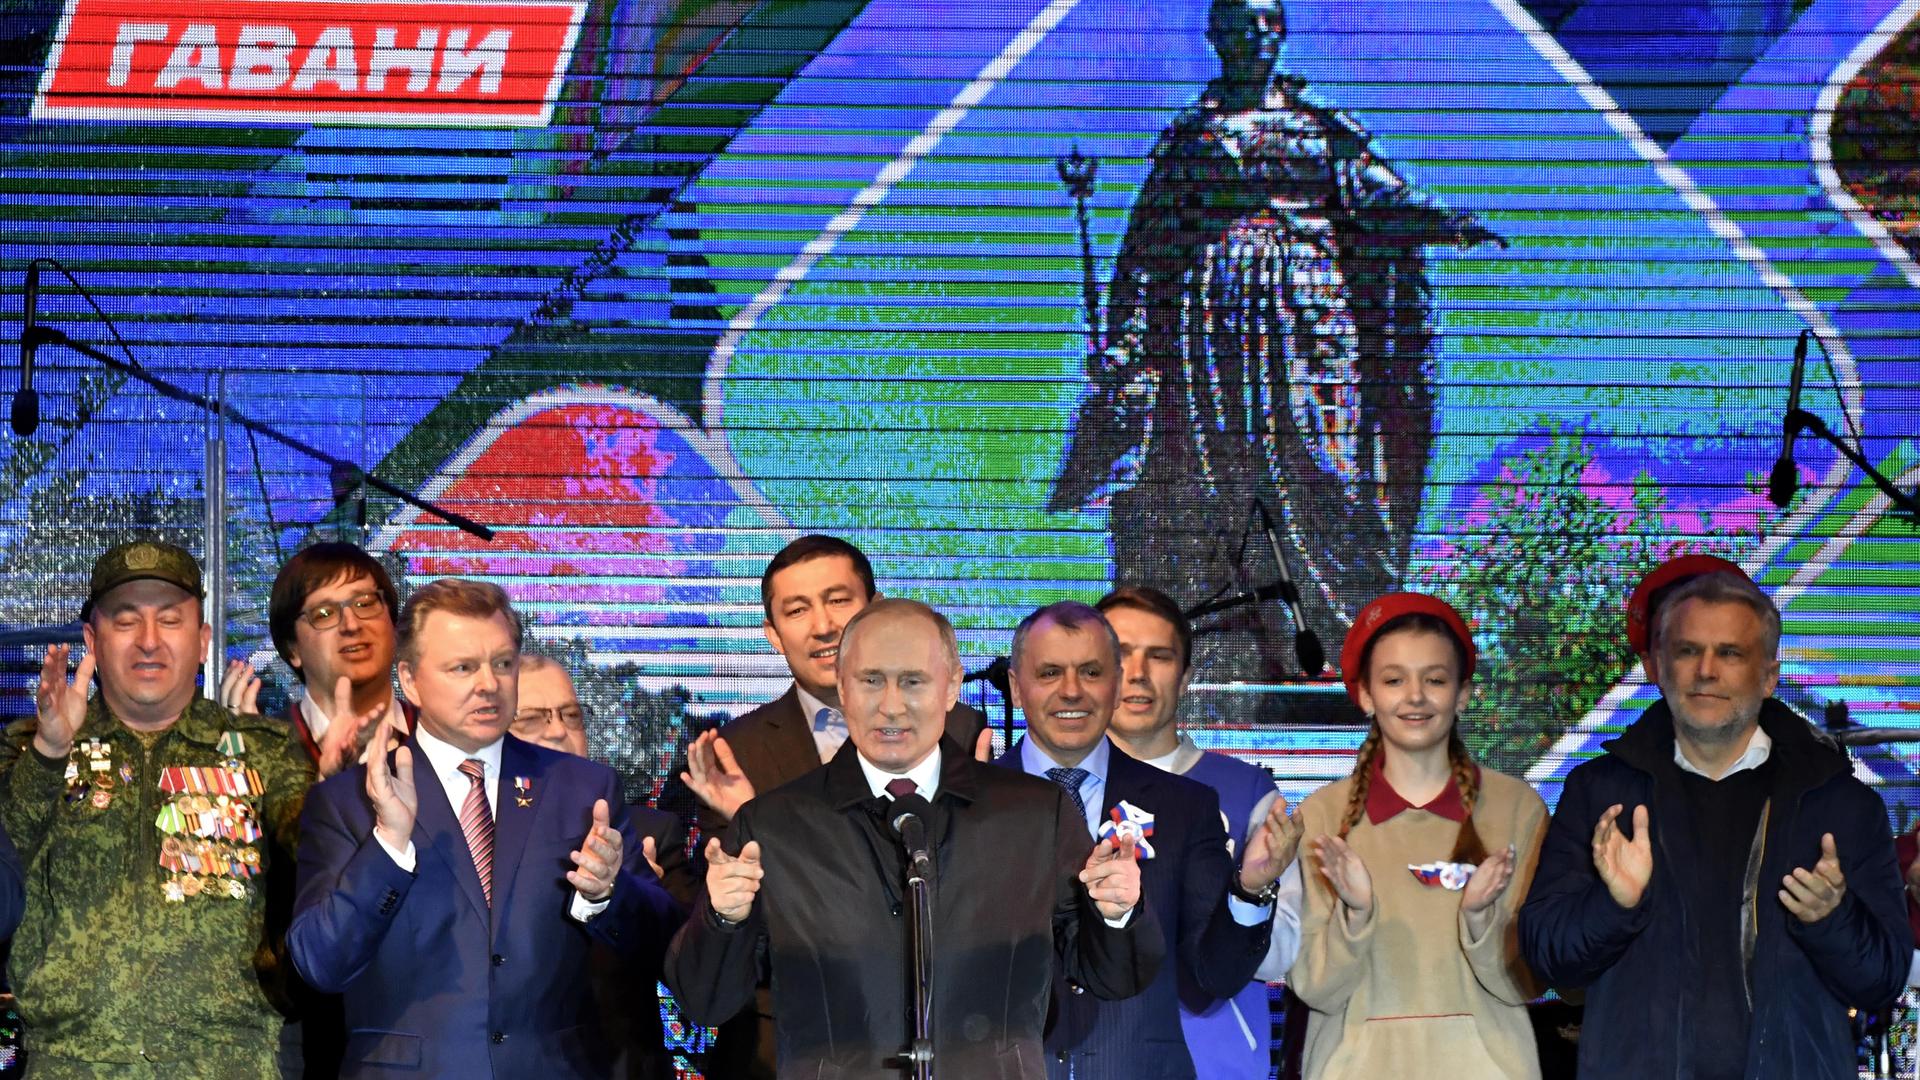 Russian President Vladimir Putin stands on a stage surrounded by others 